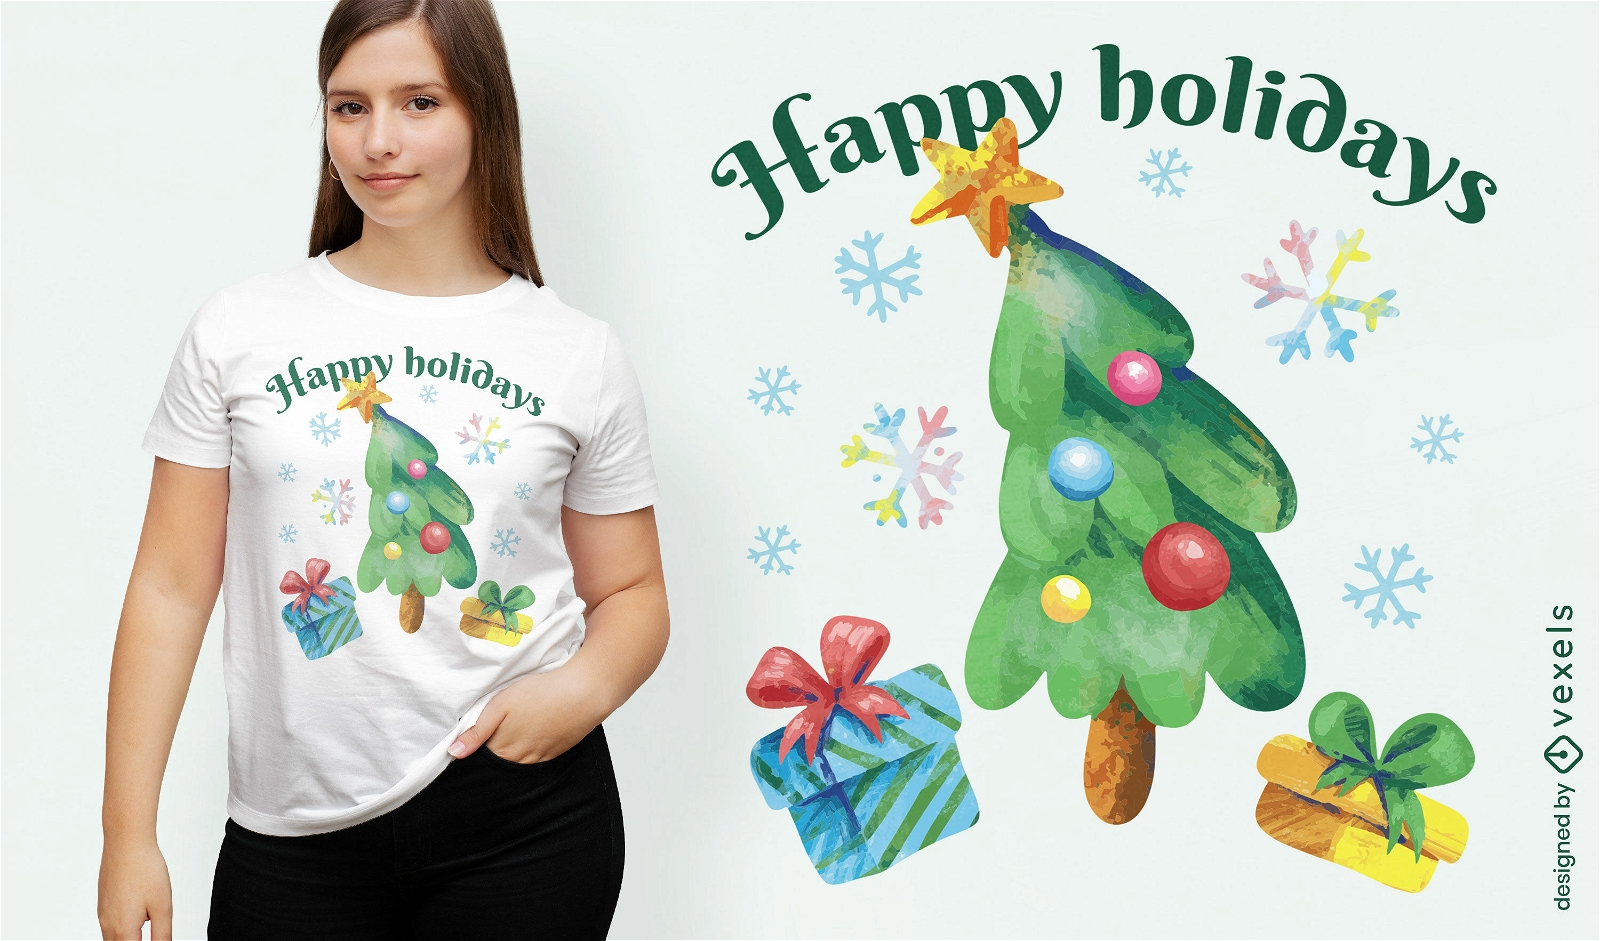 Watercolor christmas tree and gifts t-shirt design